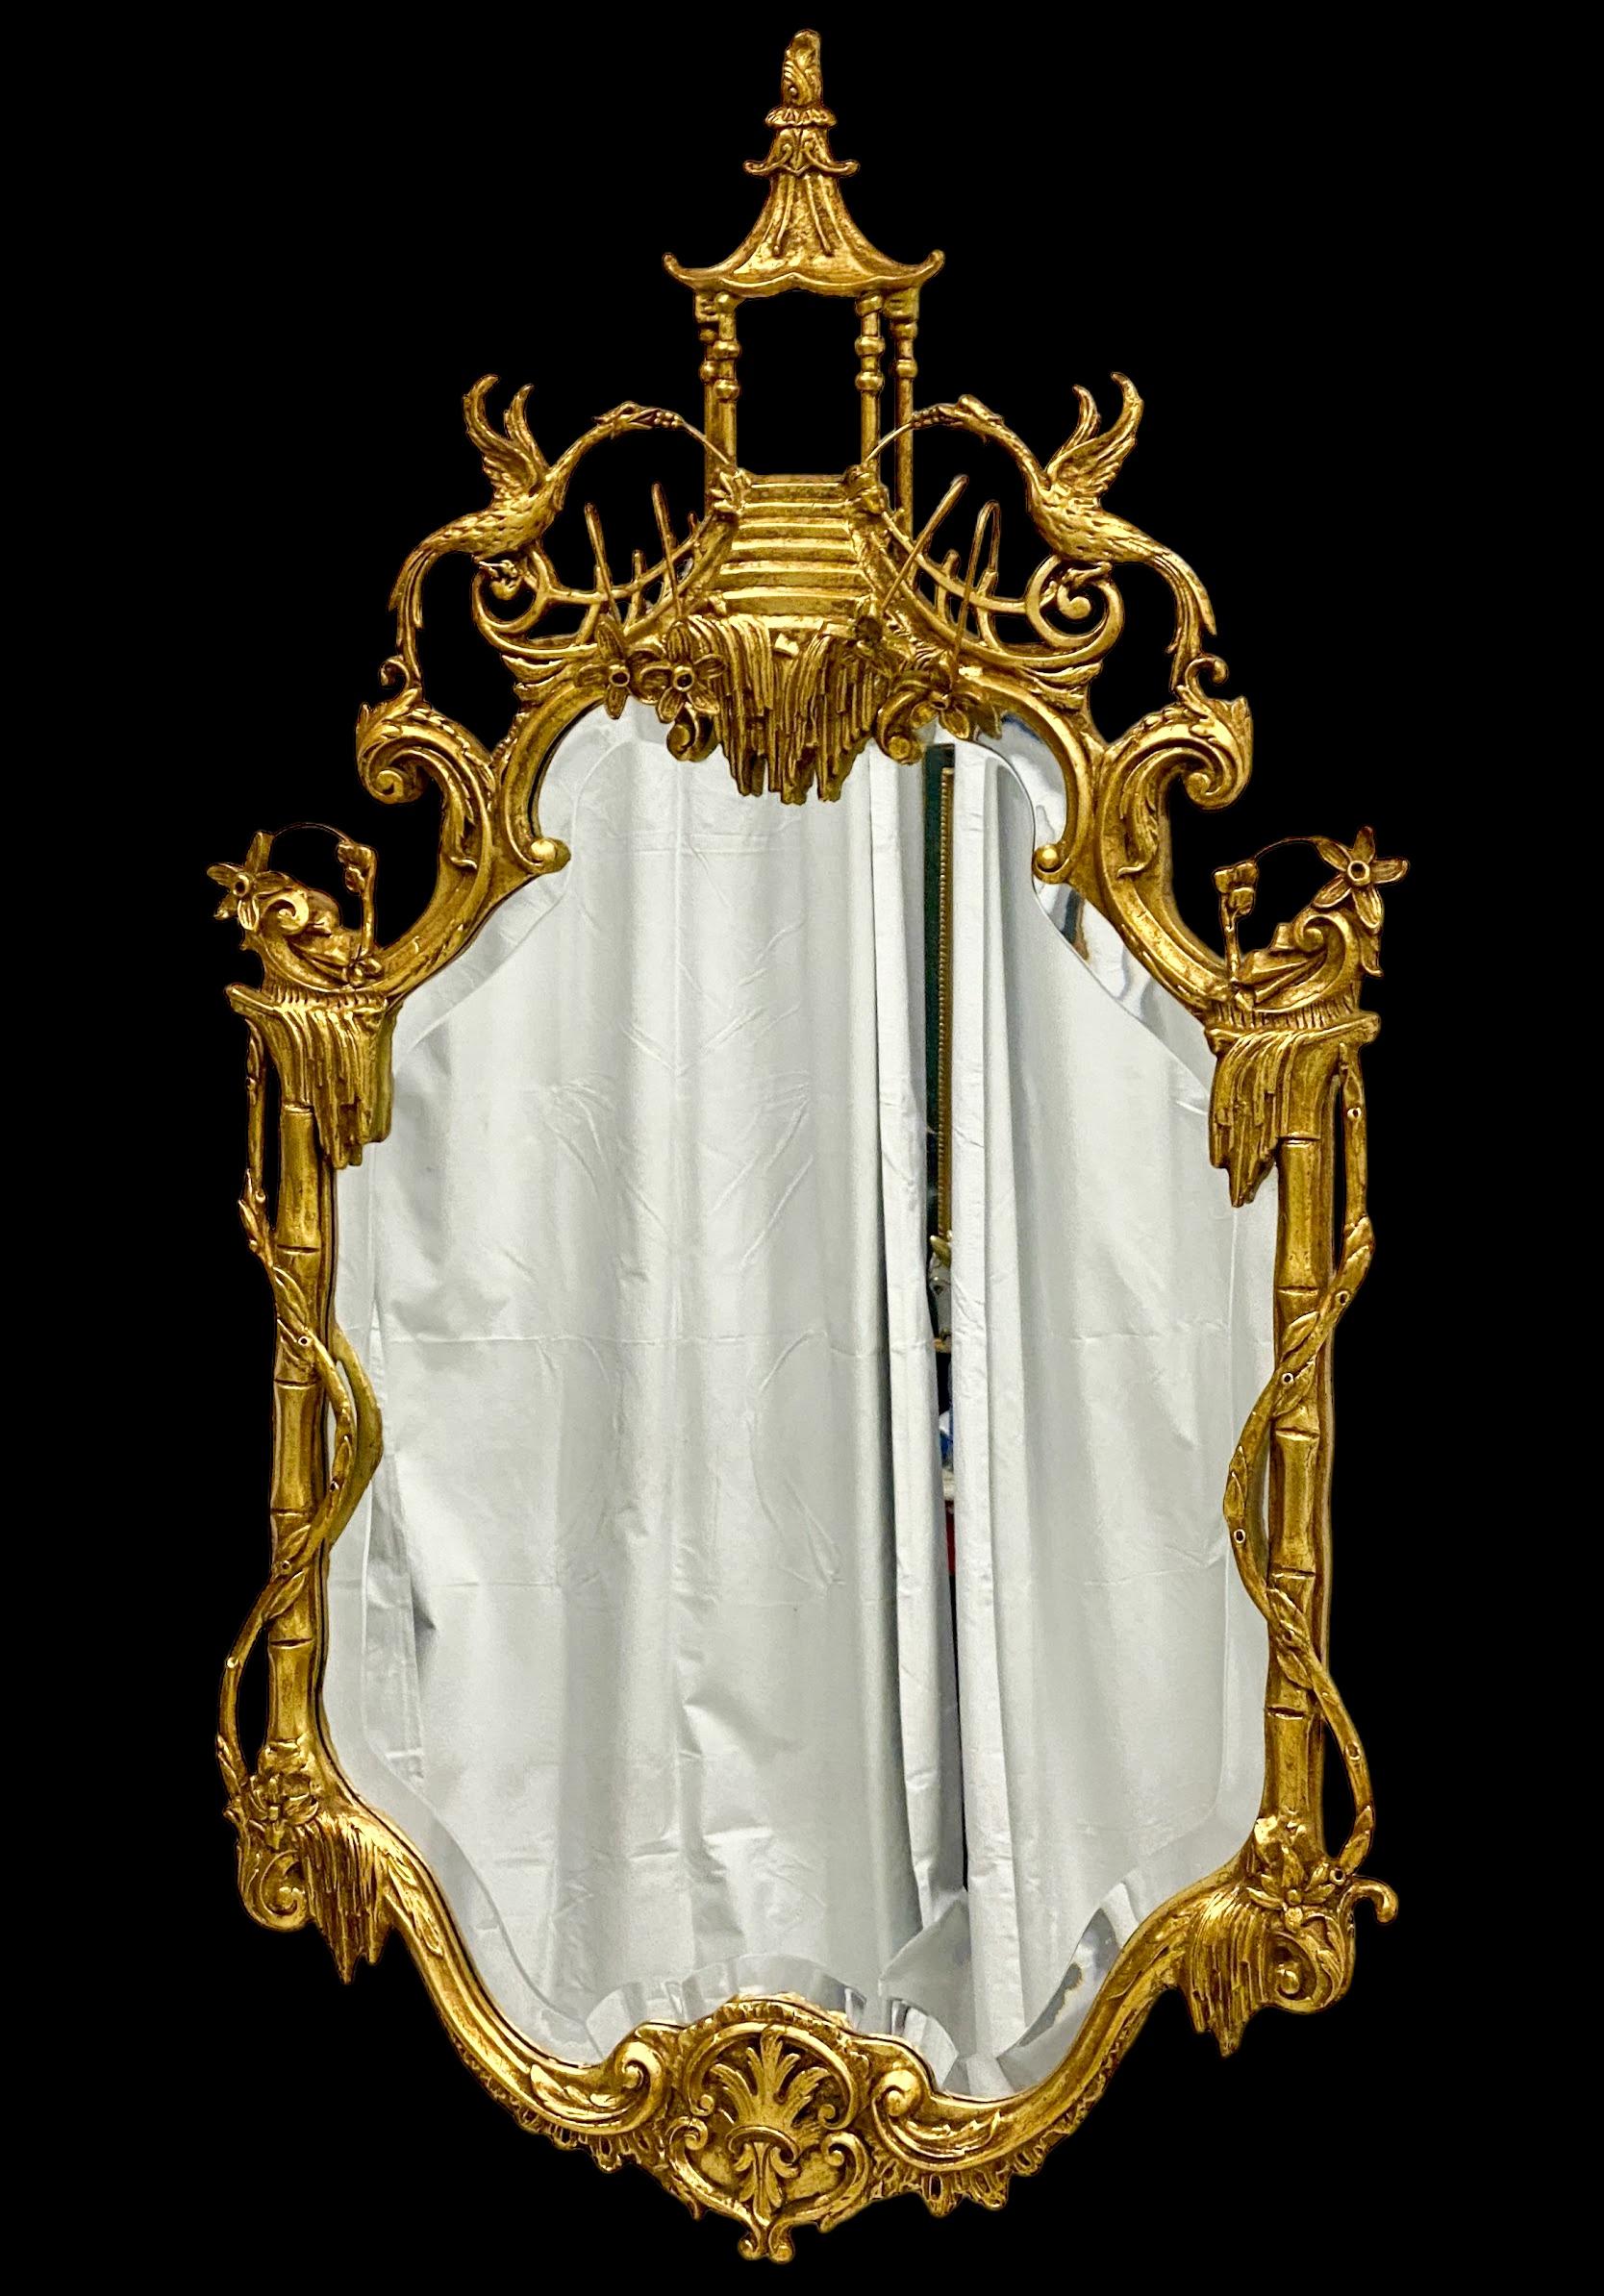 This is a mid-century Chinese chippendale style carved giltwood Italian mirror attributed to the renowned mirror manufacturer, Friedman Brothers. It is Italian and in very good condition.